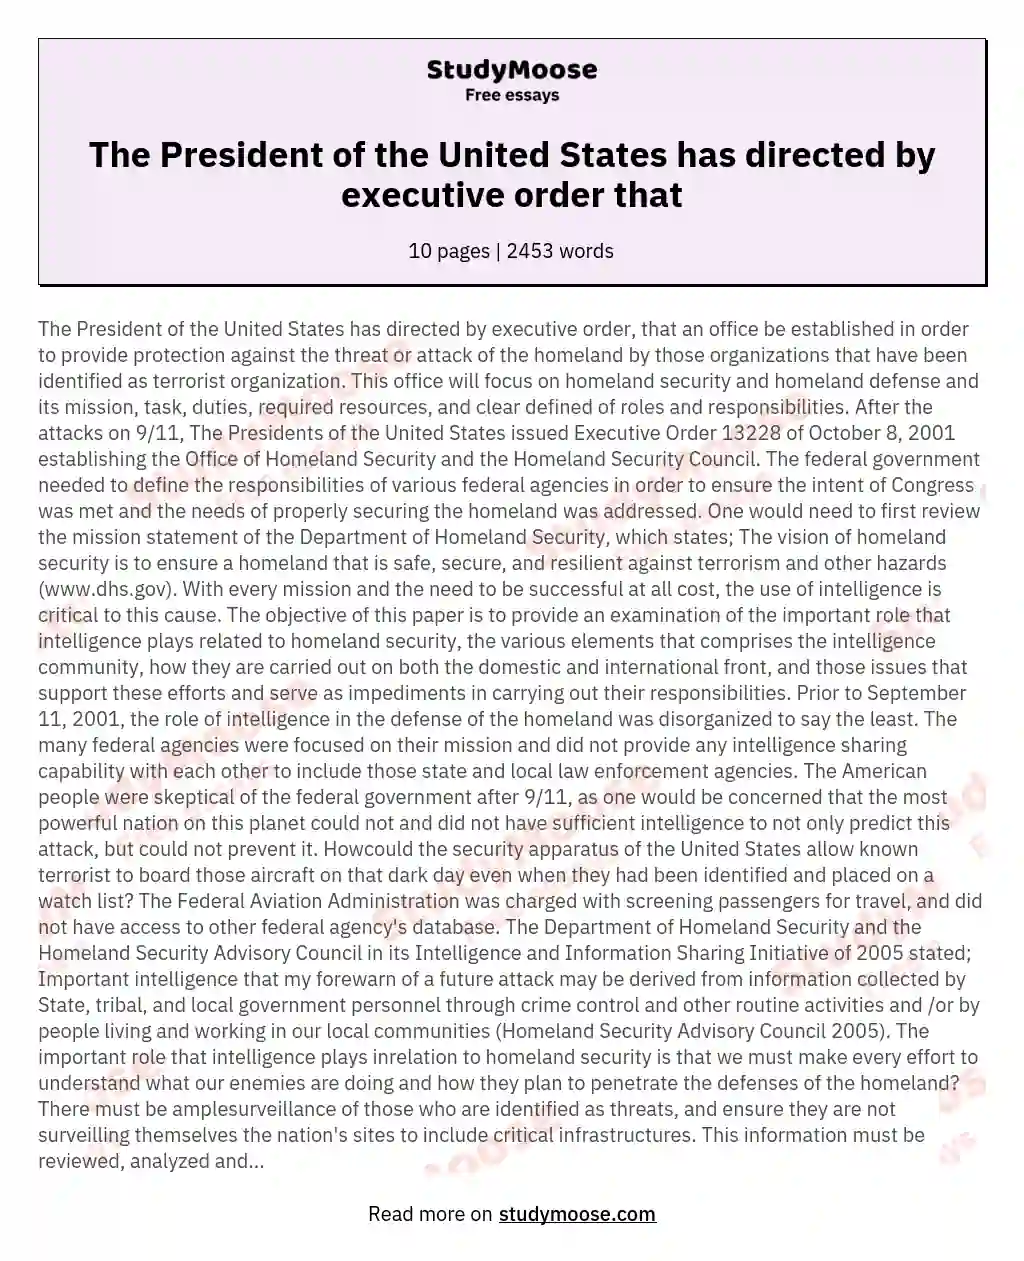 The President of the United States has directed by executive order that essay